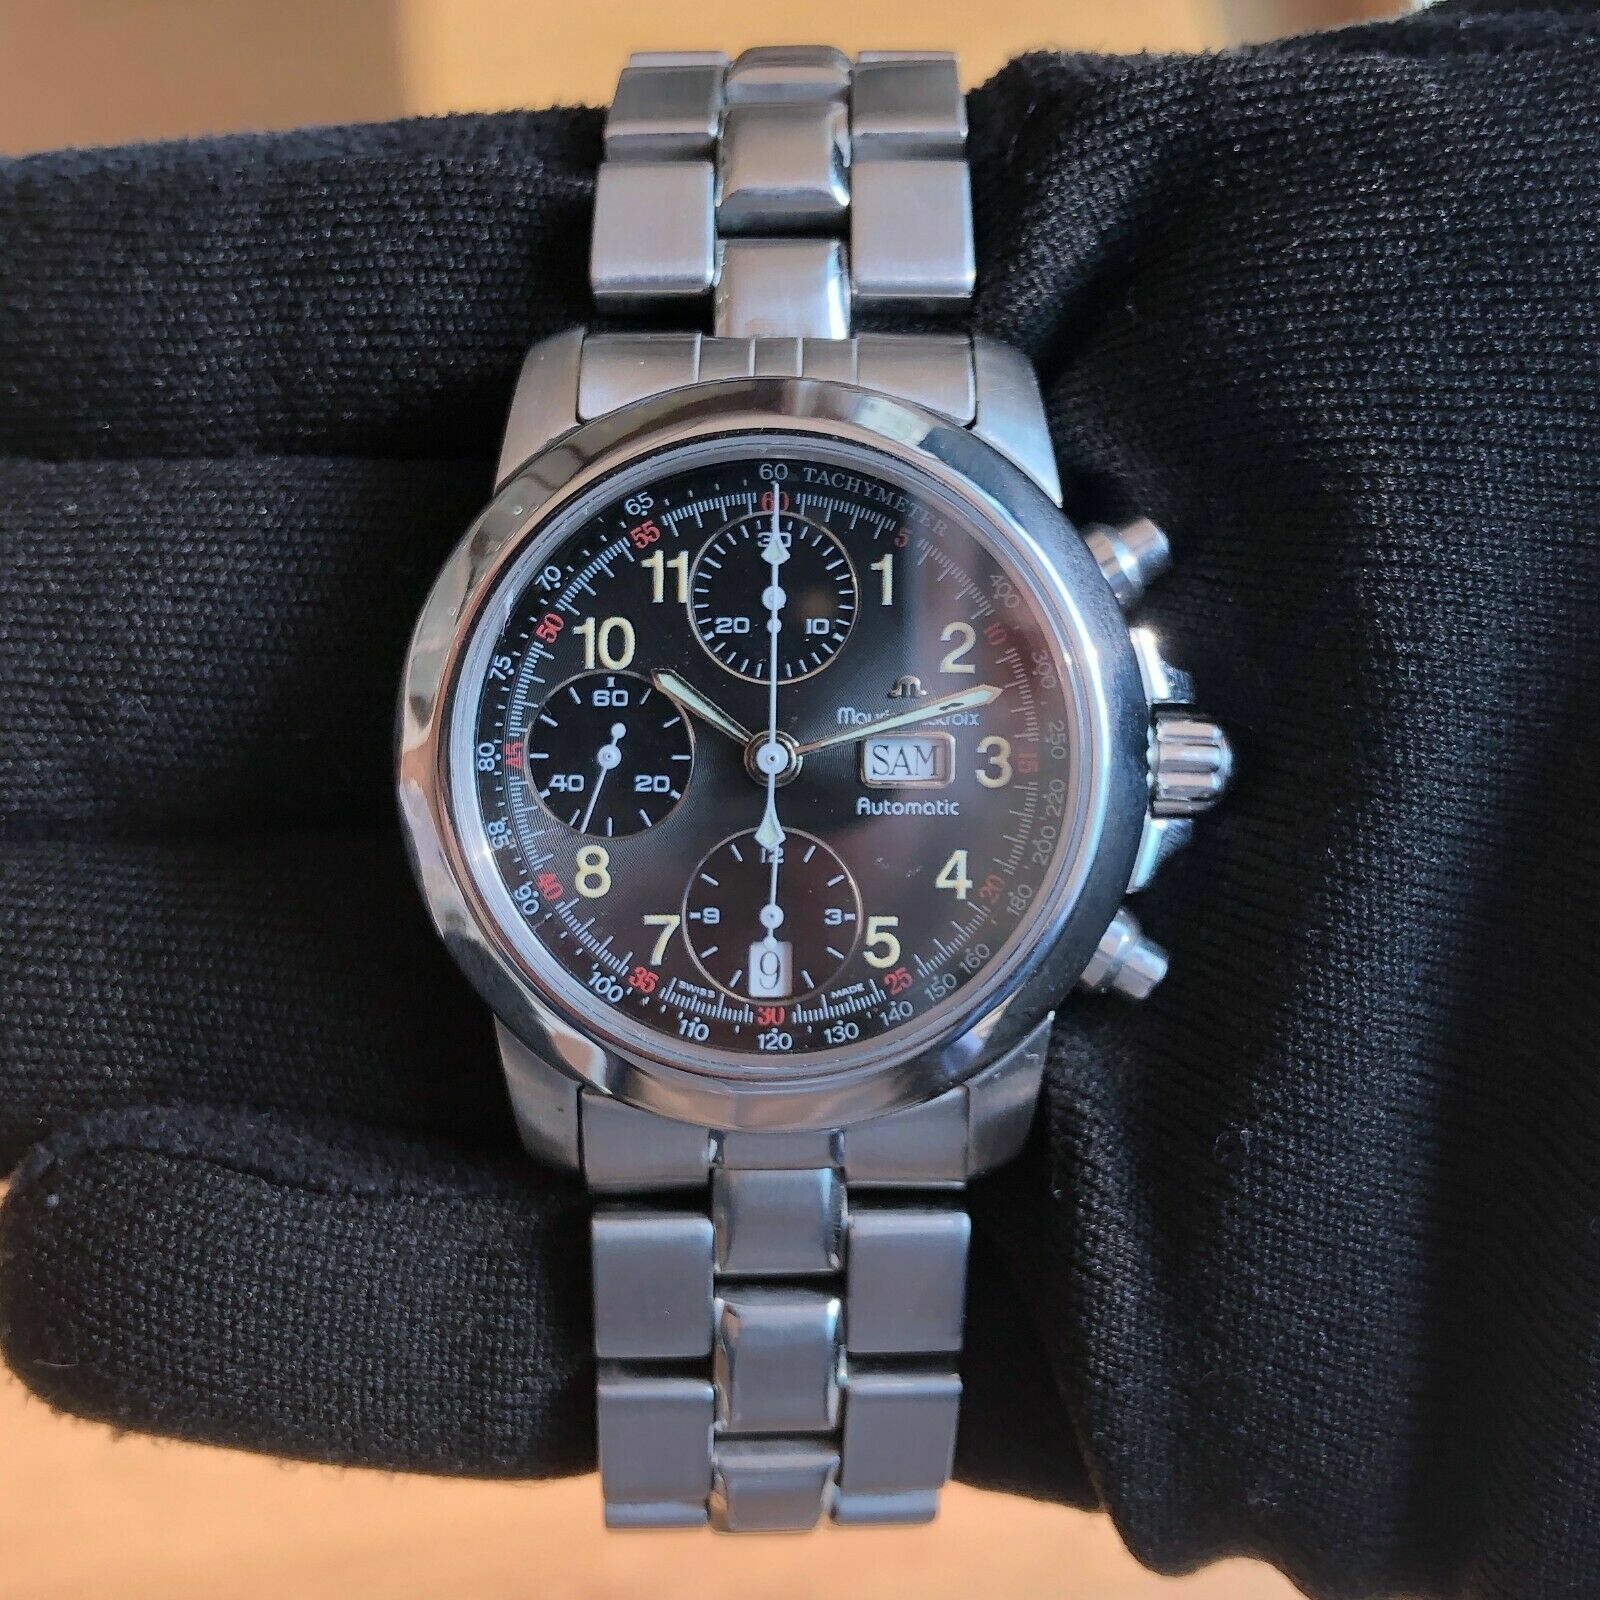 MAURICE LACROIX Chronograph 39721 Automatic Black Dial Stainless Steel Watch